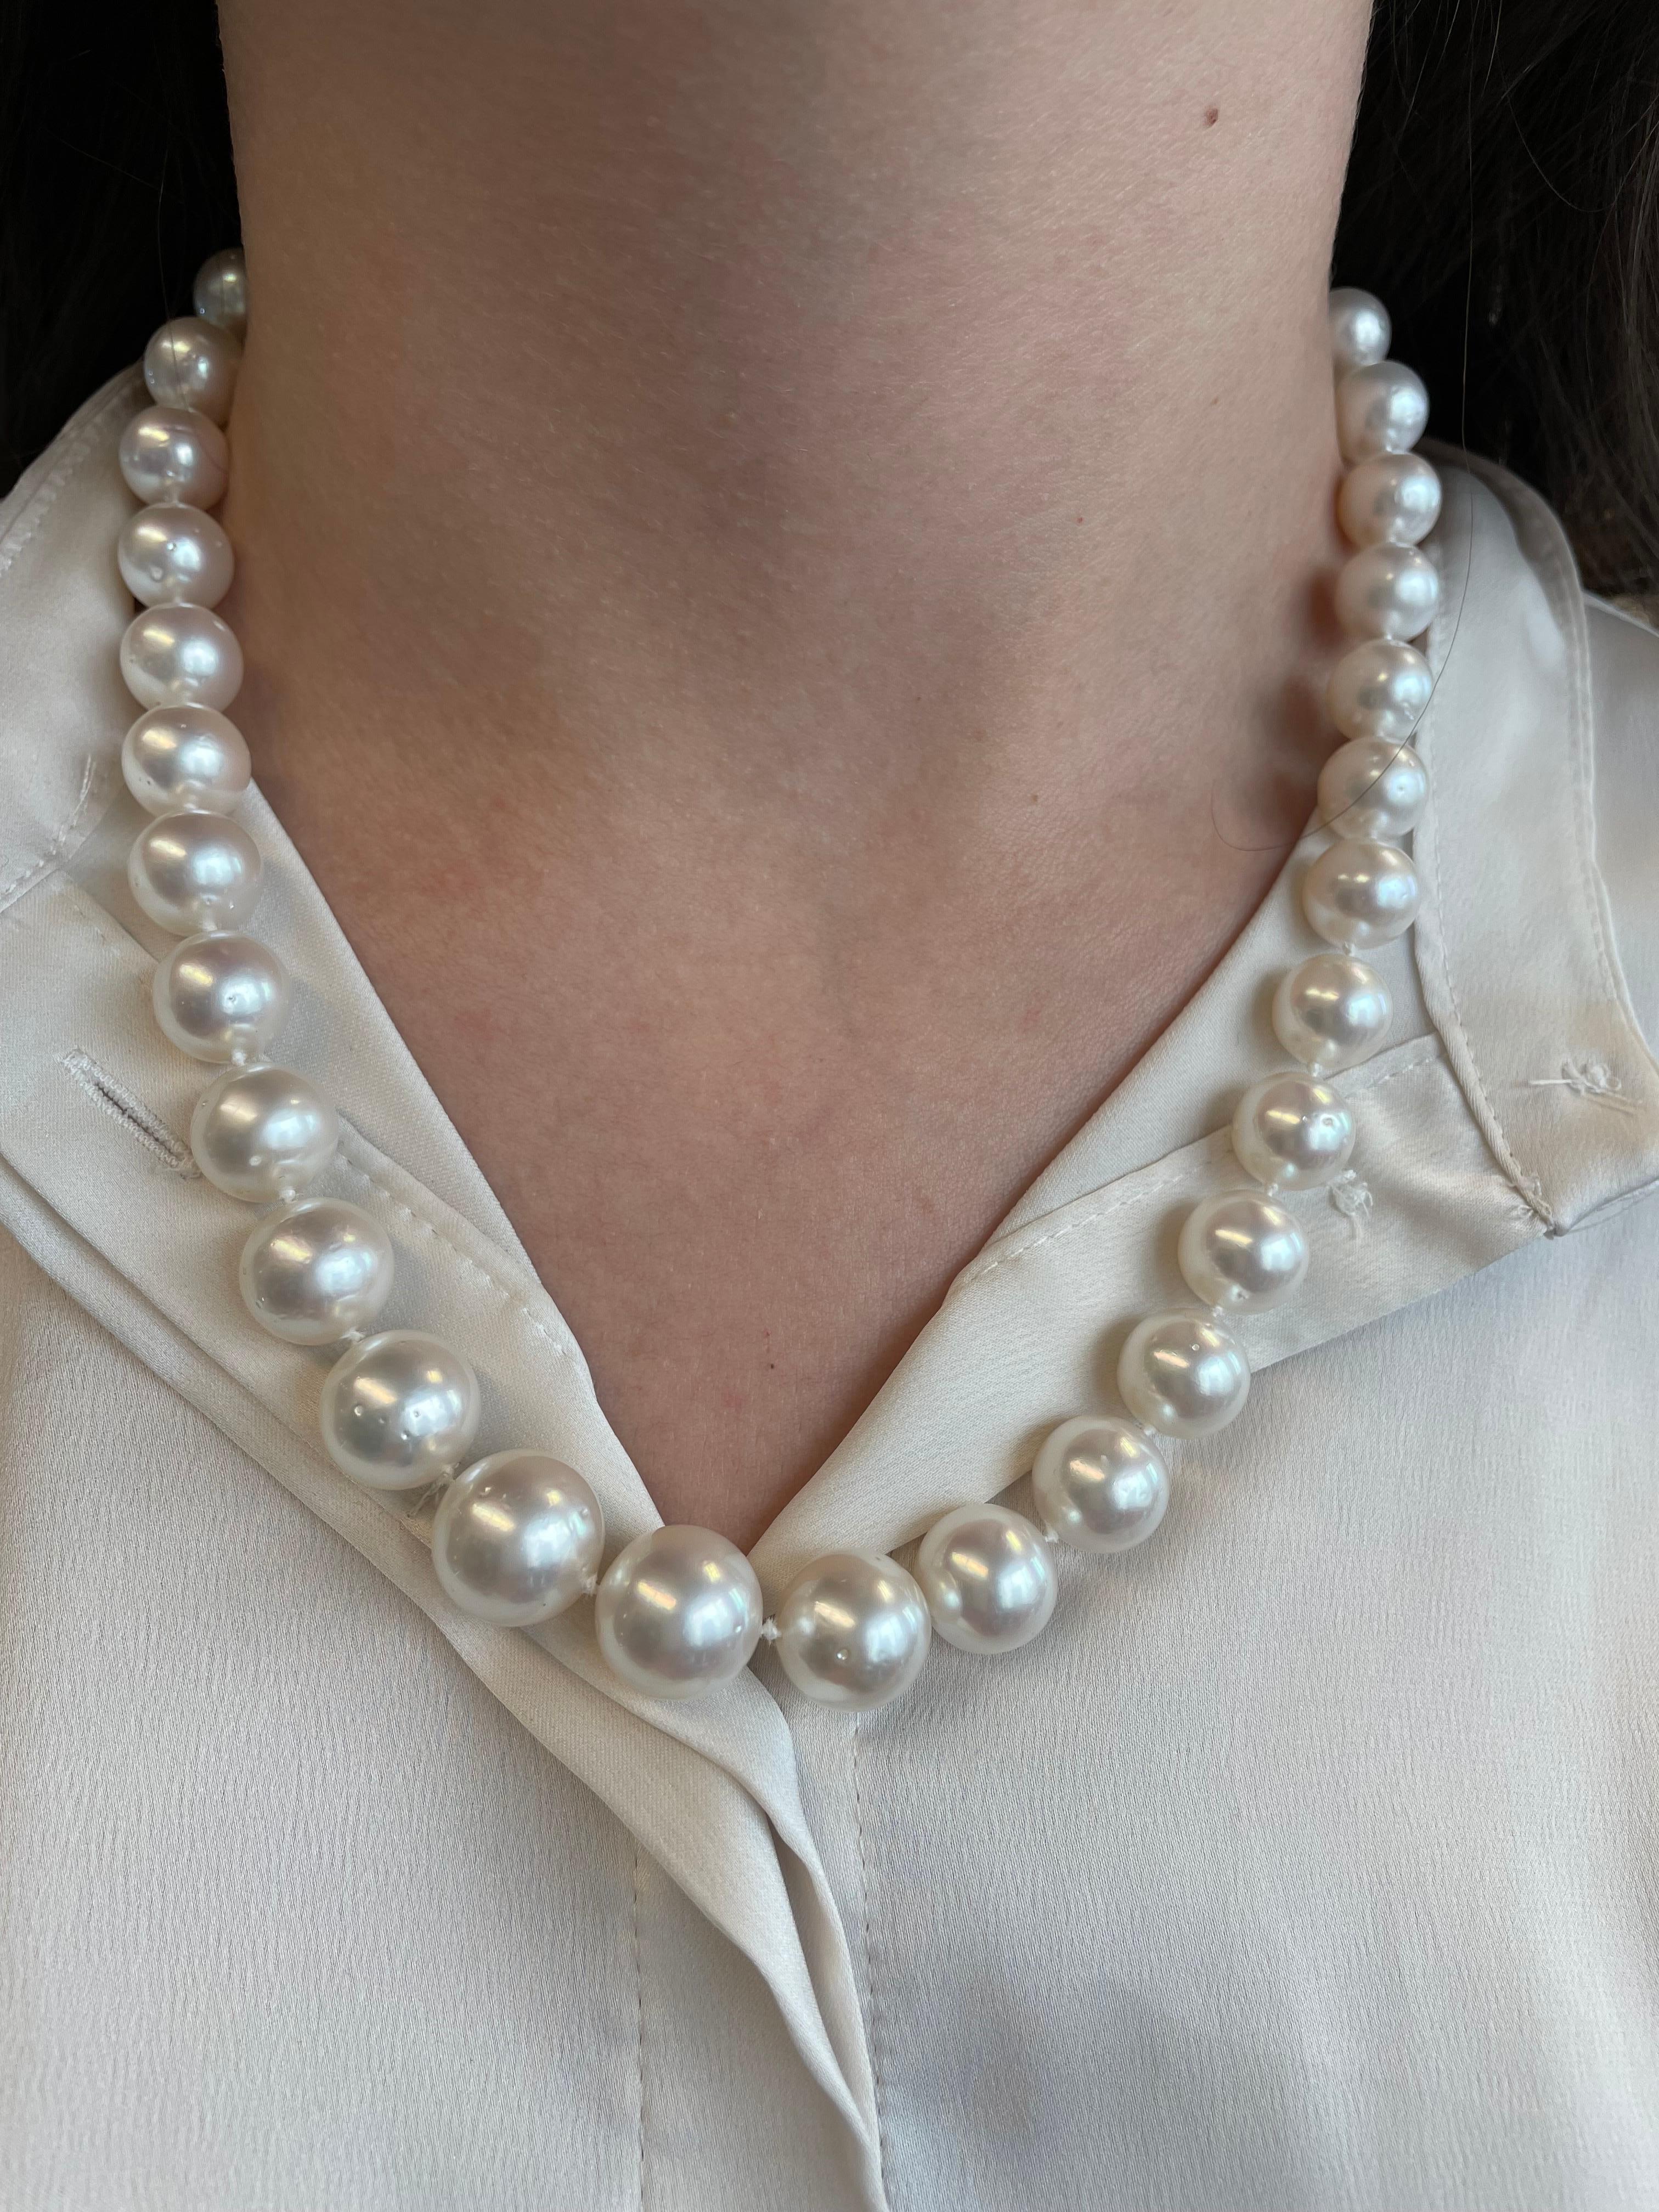 37 South Sea pearls, 10-14mm.
White gold clasp with diamonds. 
Accommodated with an up to date appraisal by a GIA G.G. upon request. Please contact us with any questions.

Item Number 
N6449